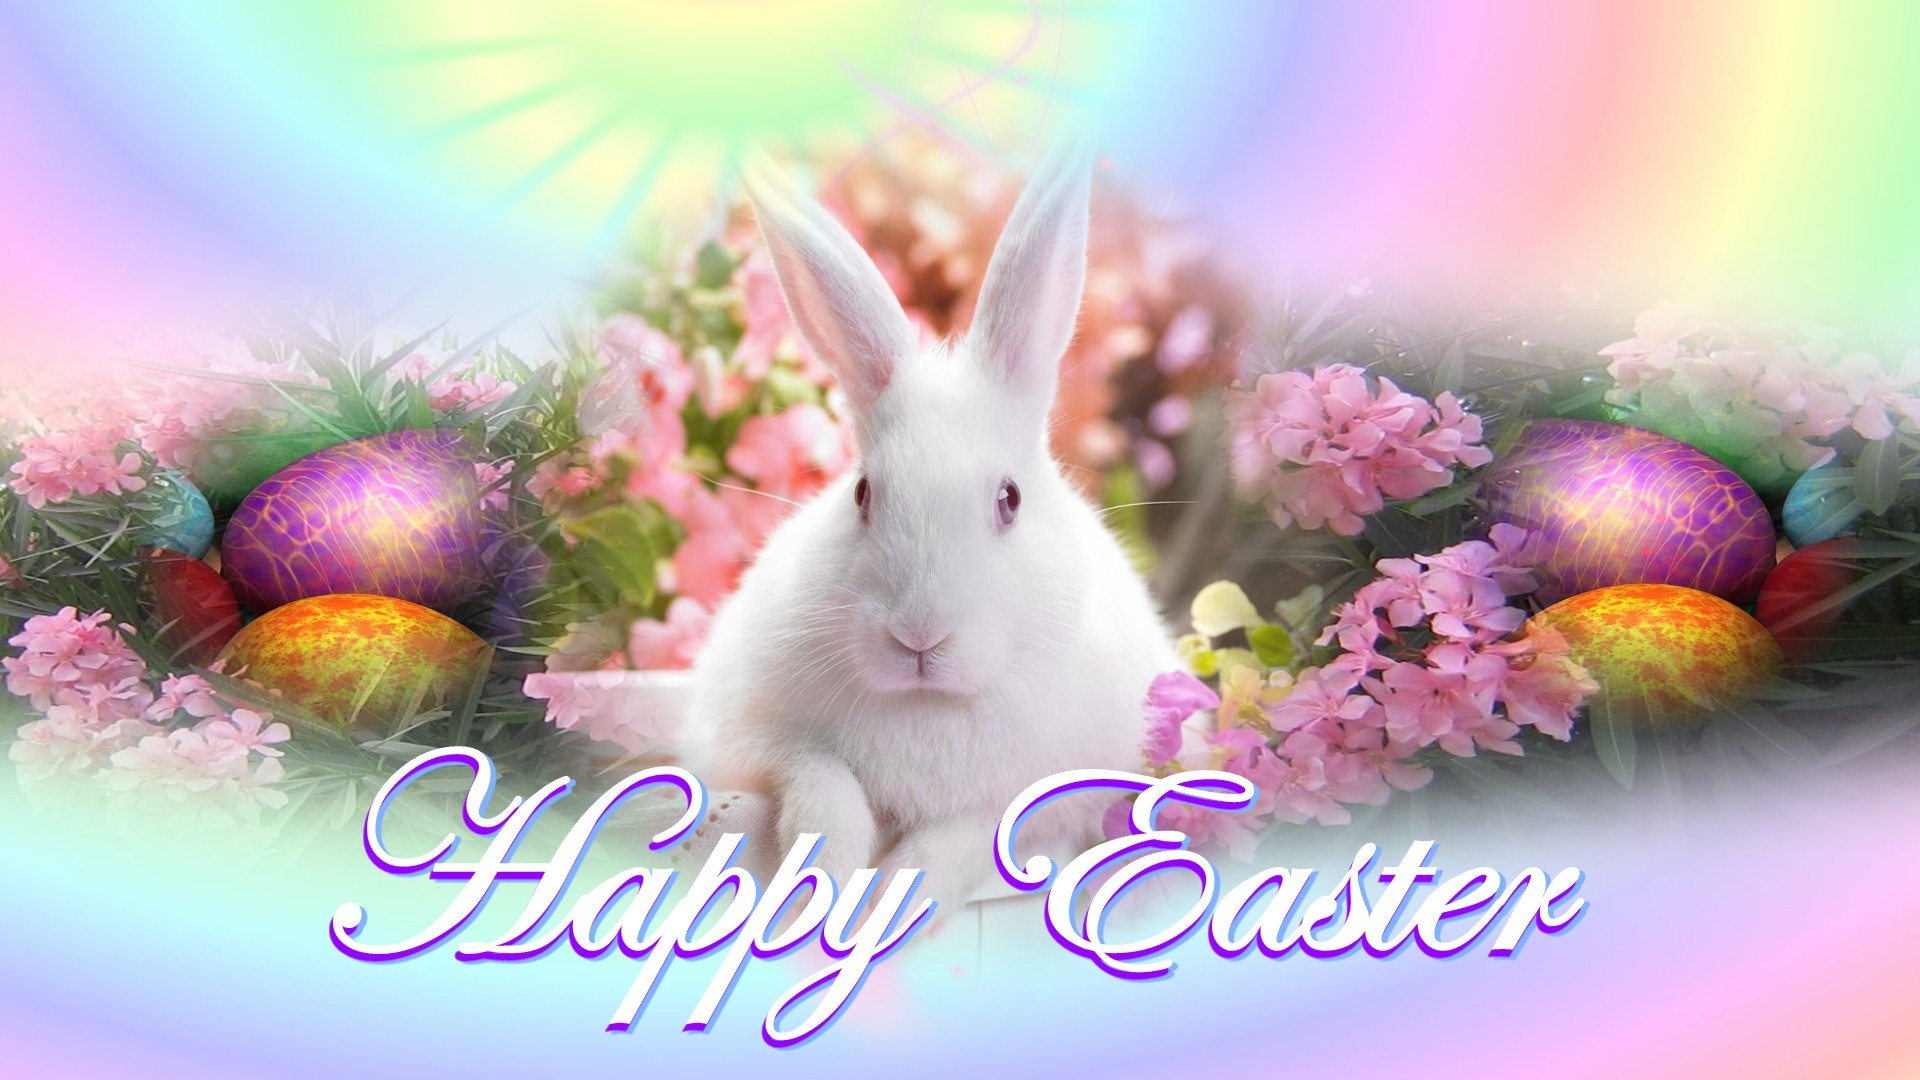 Happy Easter Bunny Pictures 2019 Funny Easter Bunny Images